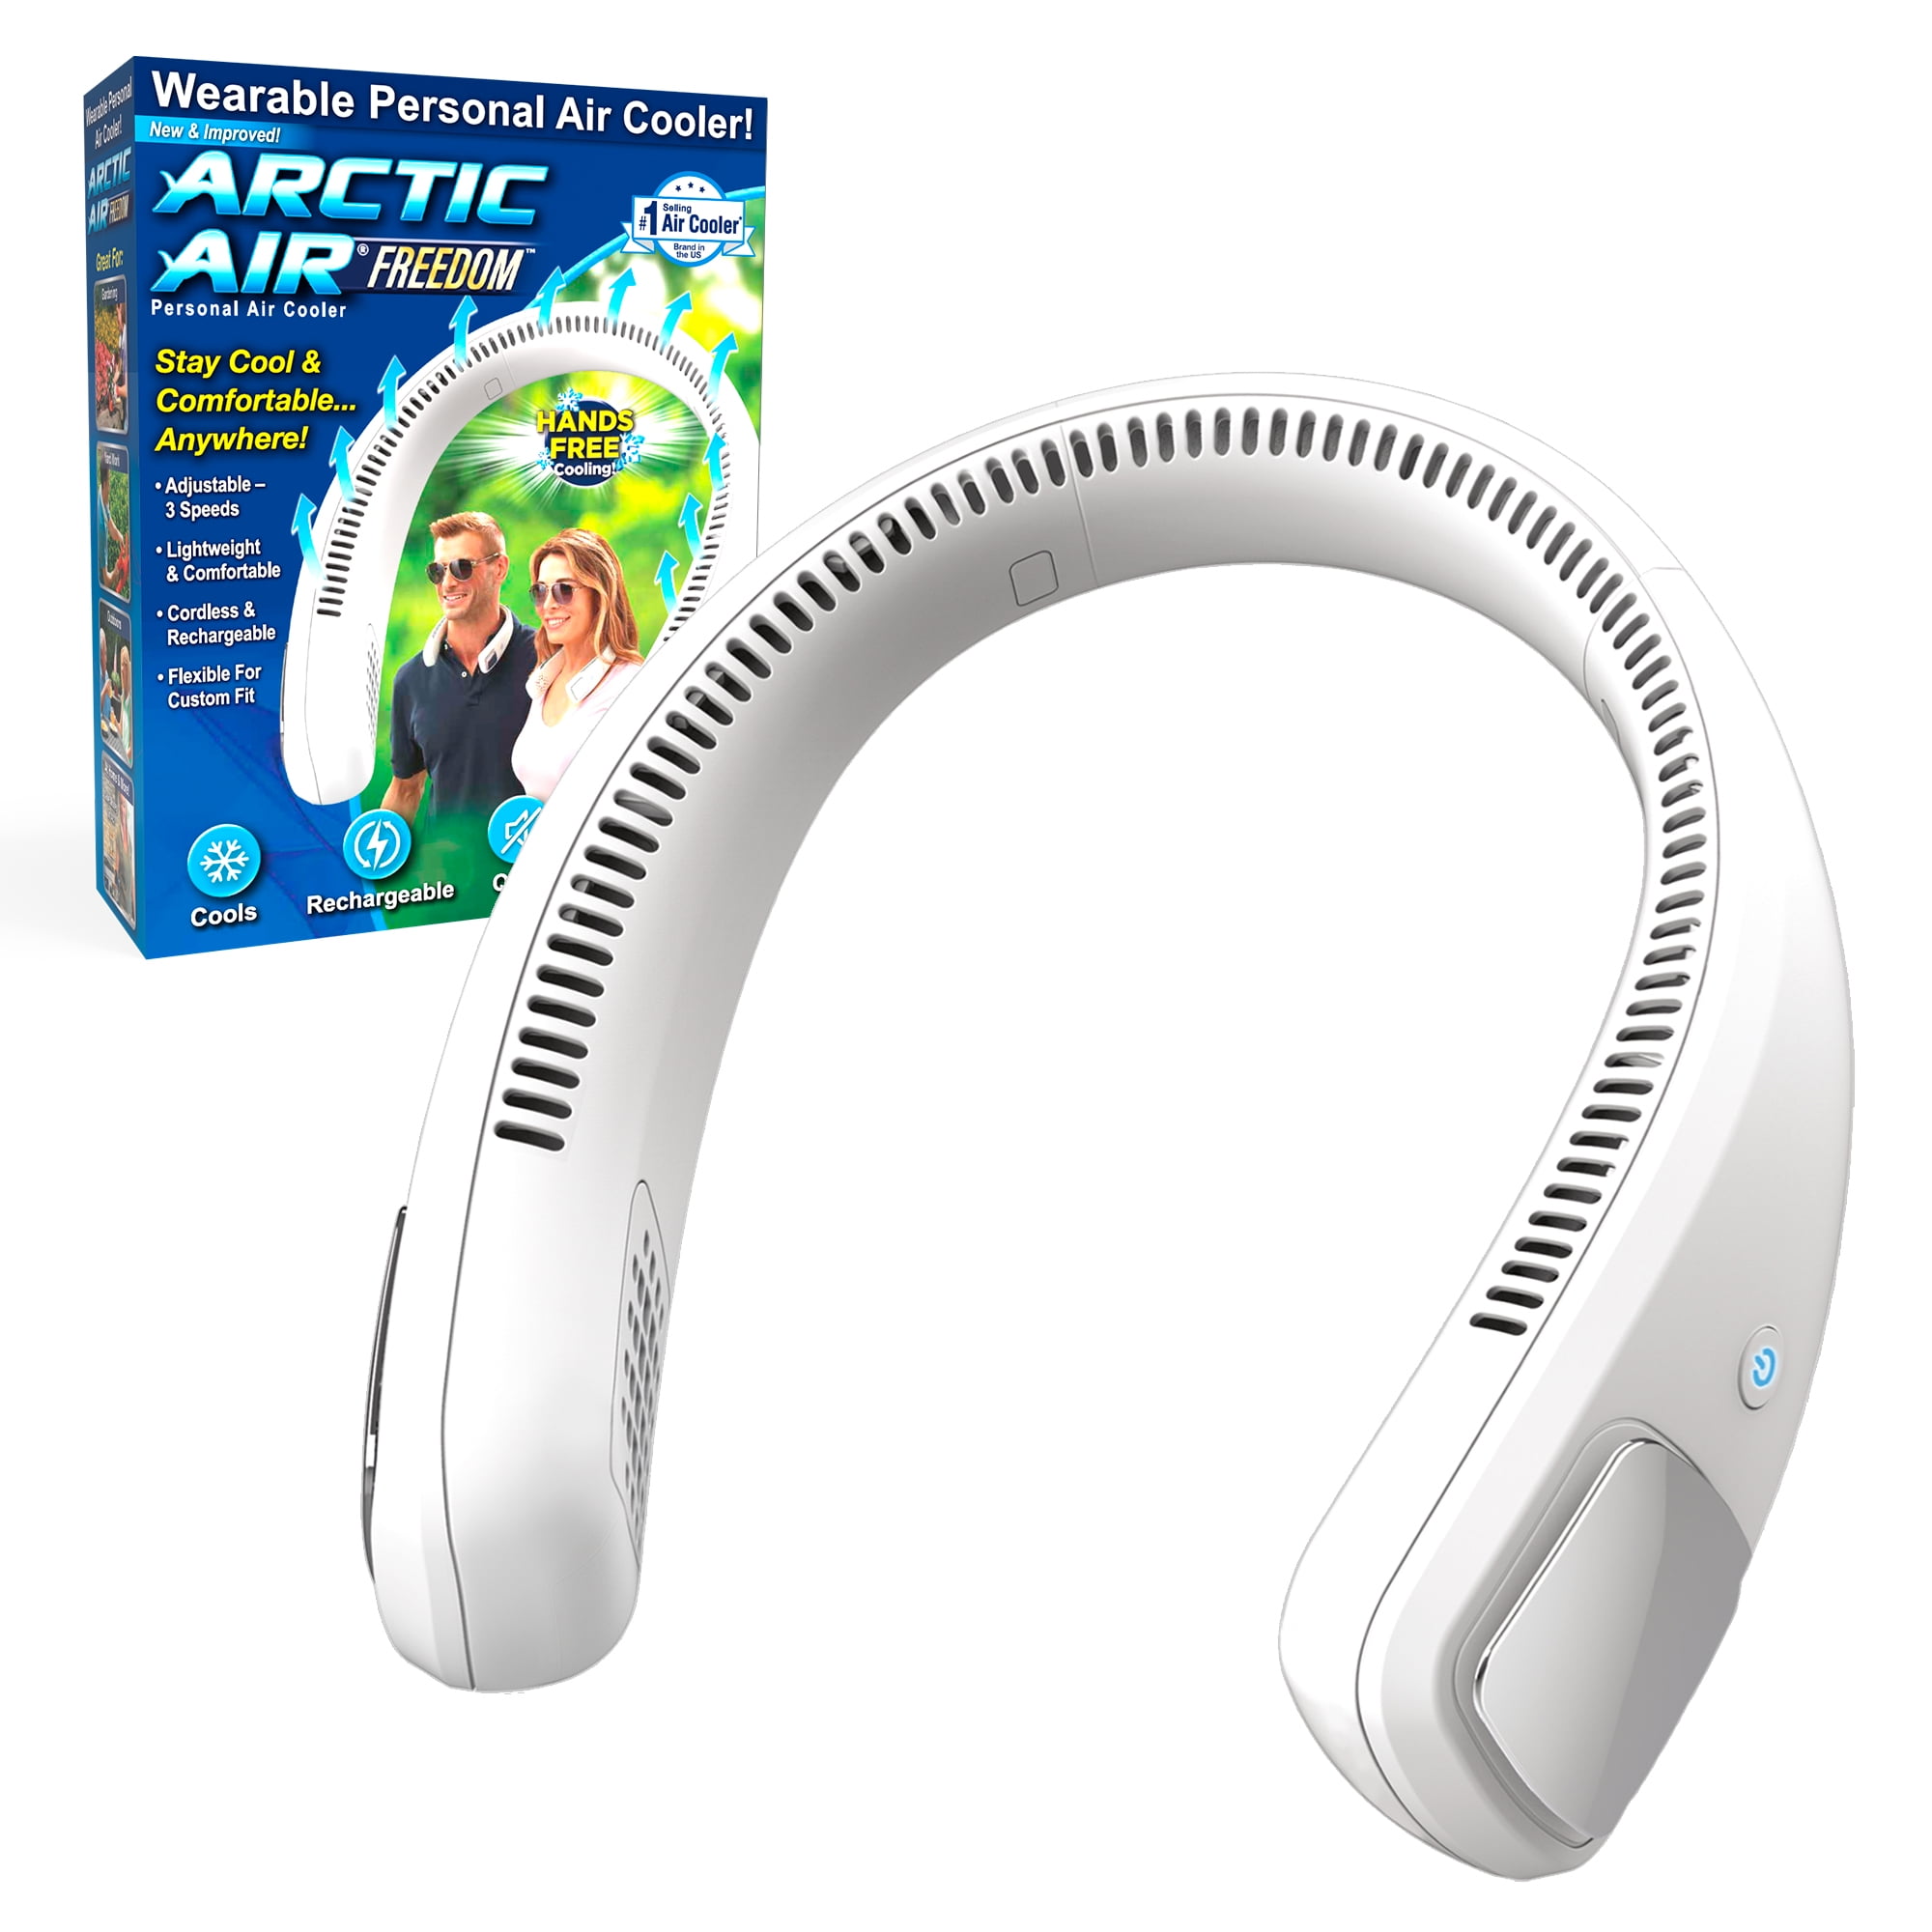 Arctic Air Freedom Wearable Personal Neck Cooler and Air Cooler, as Seen On  TV